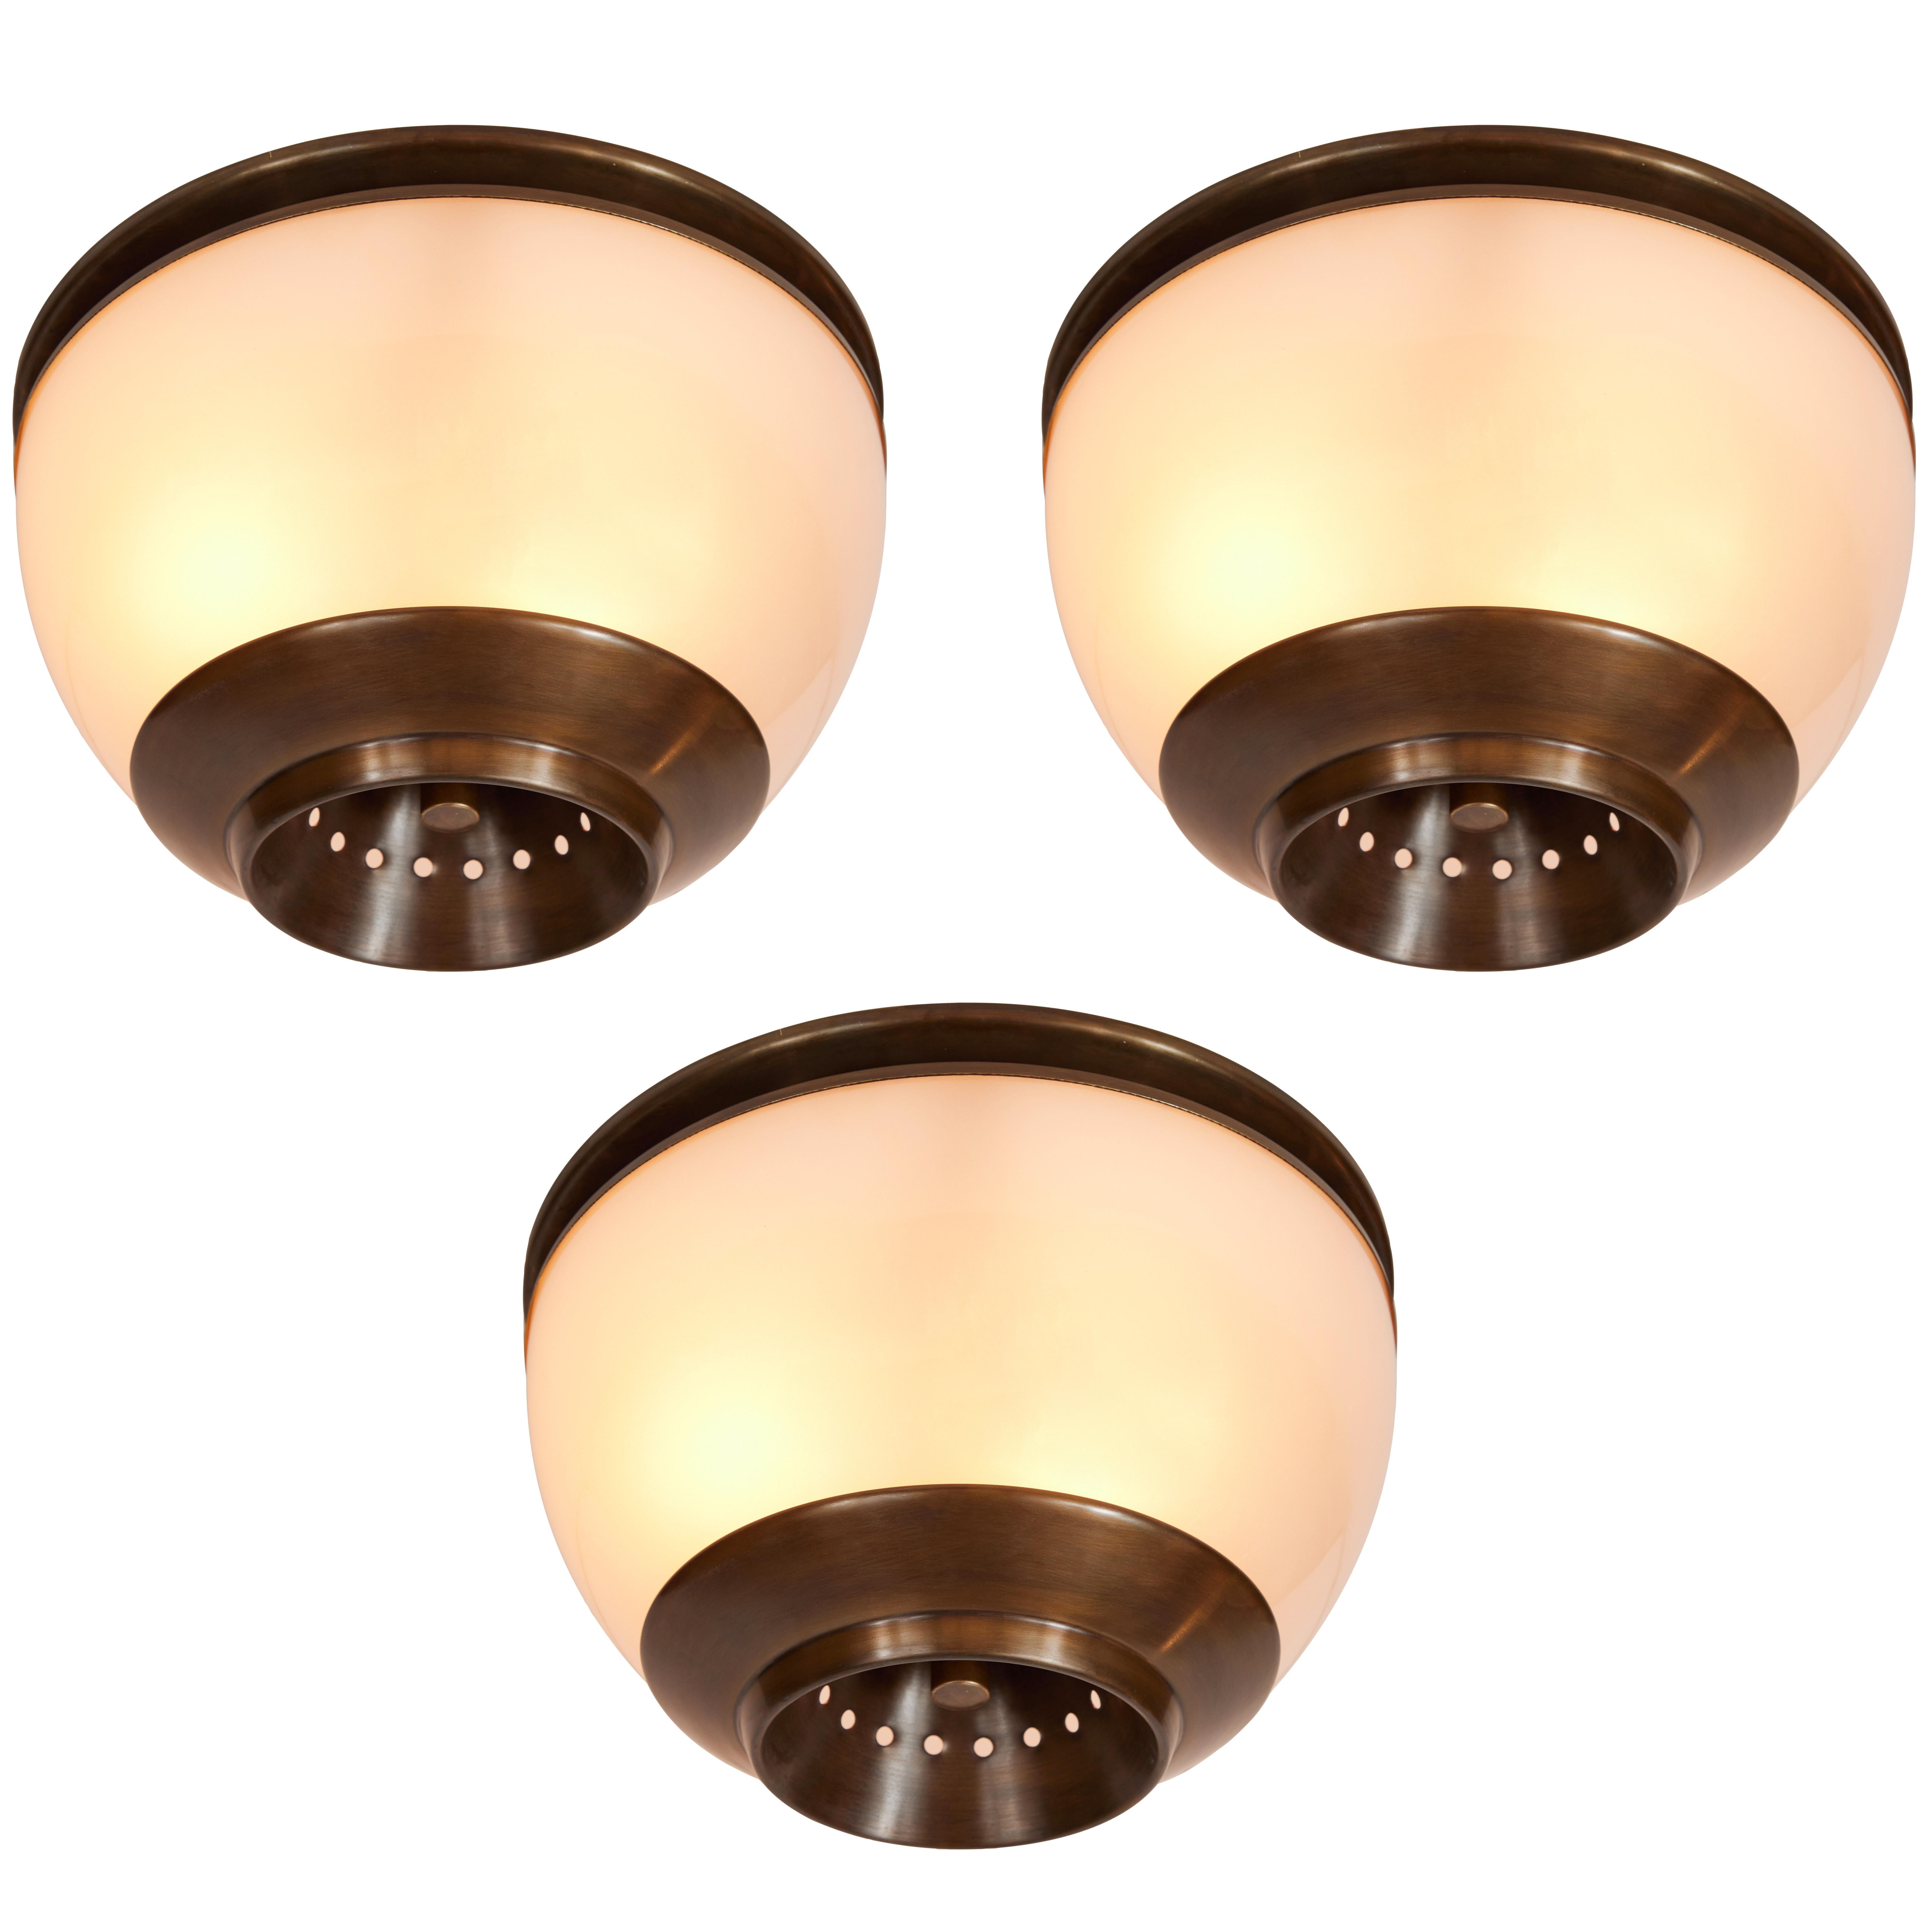 1960s Luigi Caccia Dominioni LSP3 ceiling or wall light for Azucena. Executed in blown opaline glass and patinated brass. 

Price is per item. 3 lamps available. Also available in a larger size.

Azucena was one of the most innovative lighting